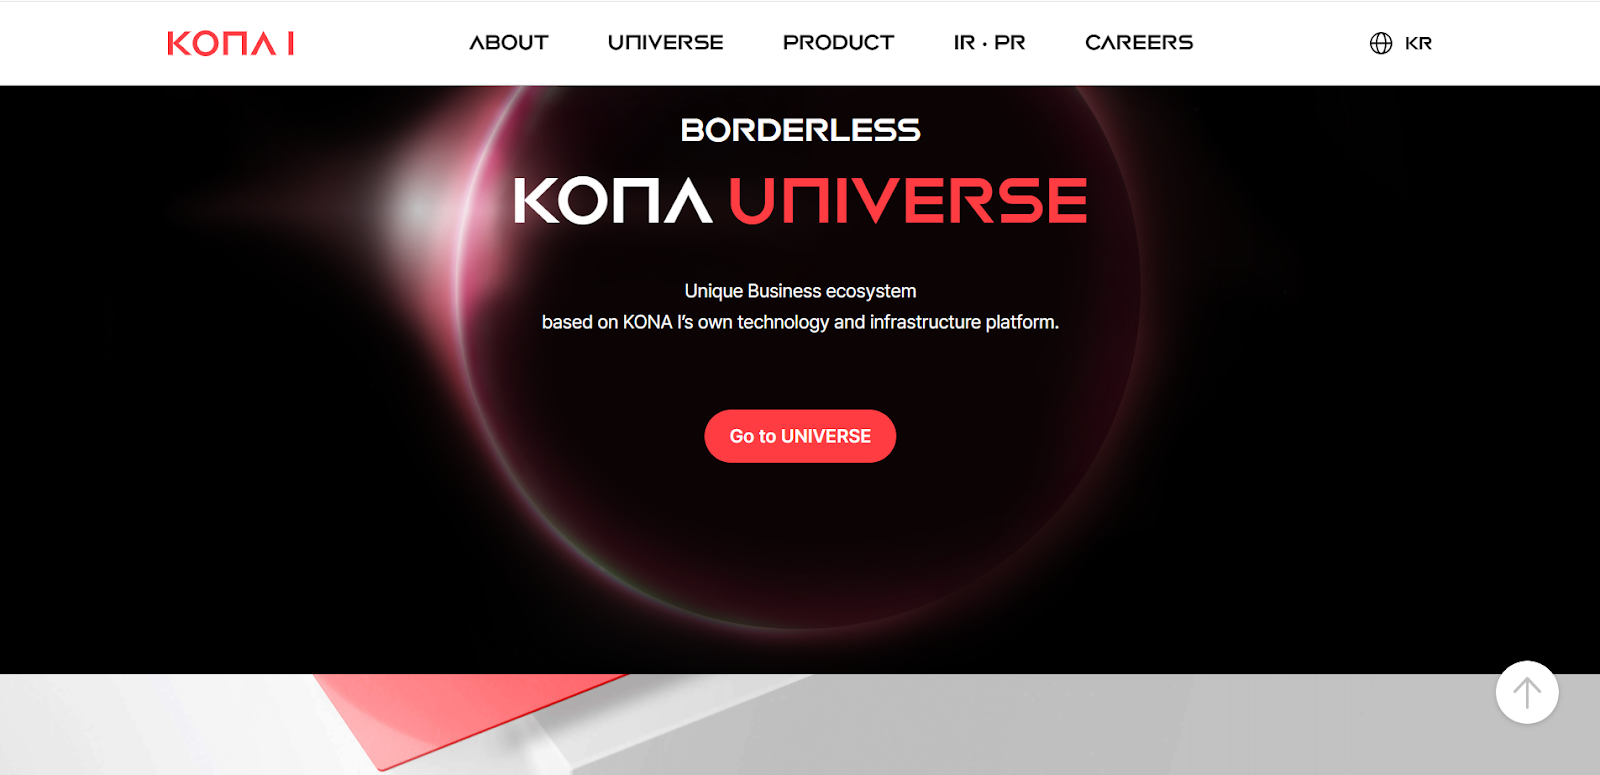 Kona software lab is a well-known software company in Bangladesh